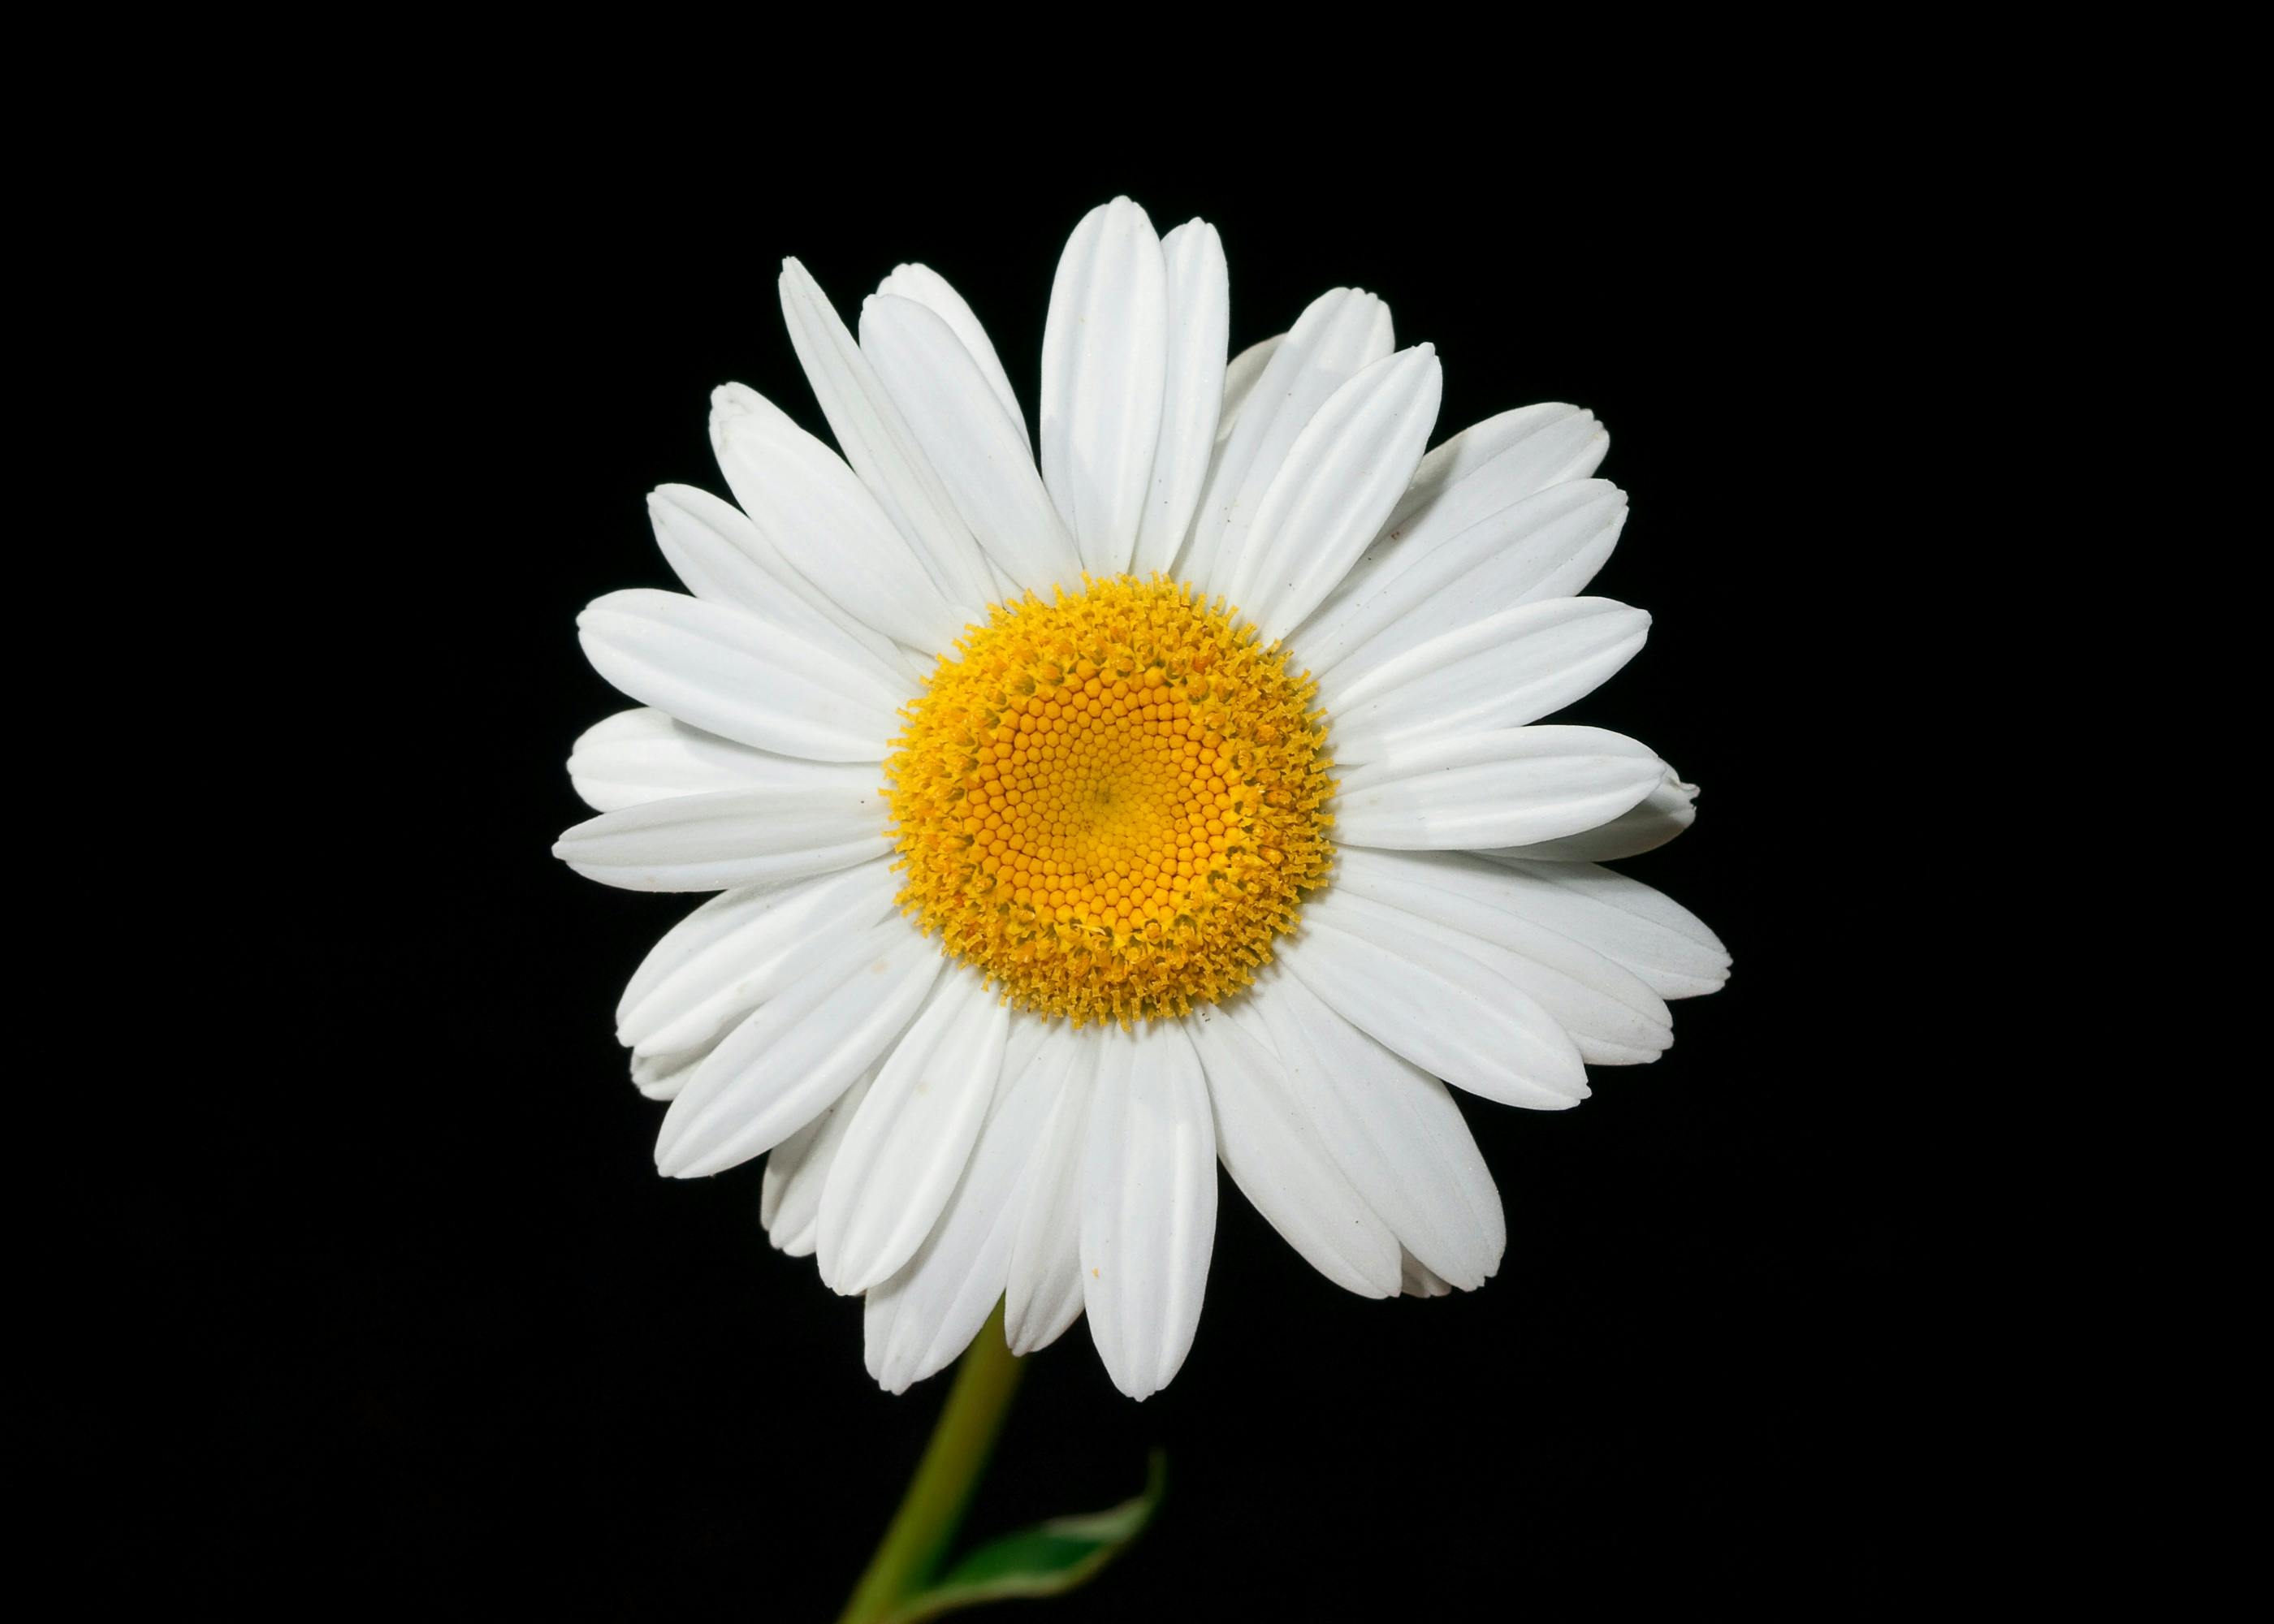 Daisy Desktop Wallpaper Images  Free Photos PNG Stickers Wallpapers   Backgrounds  rawpixel